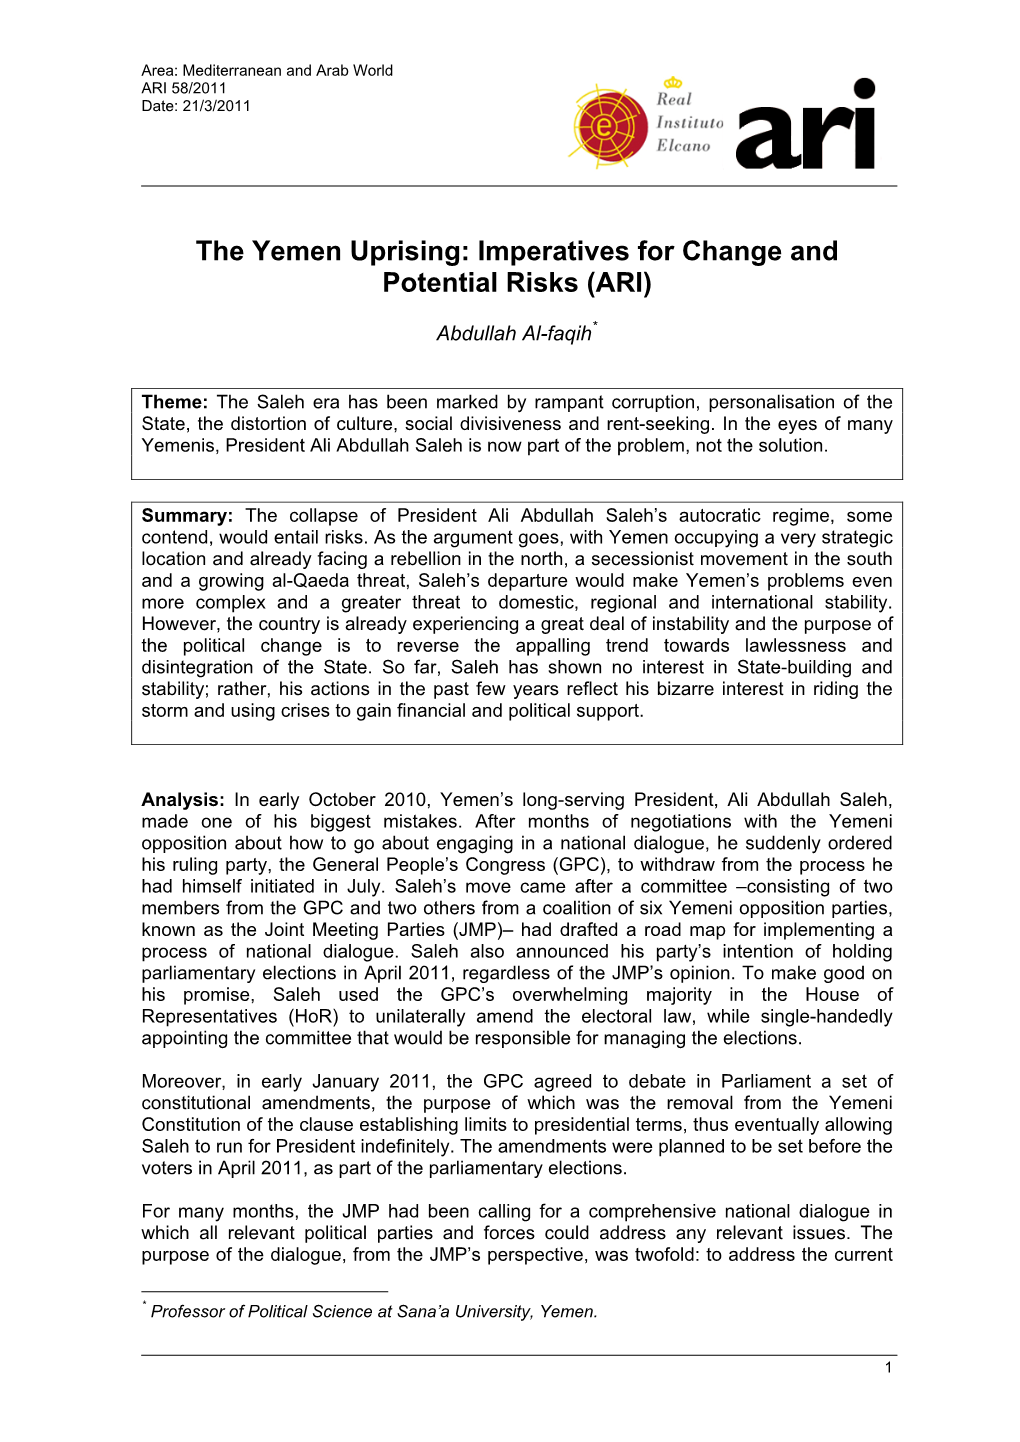 The Yemen Uprising: Imperatives for Change and Potential Risks (ARI)